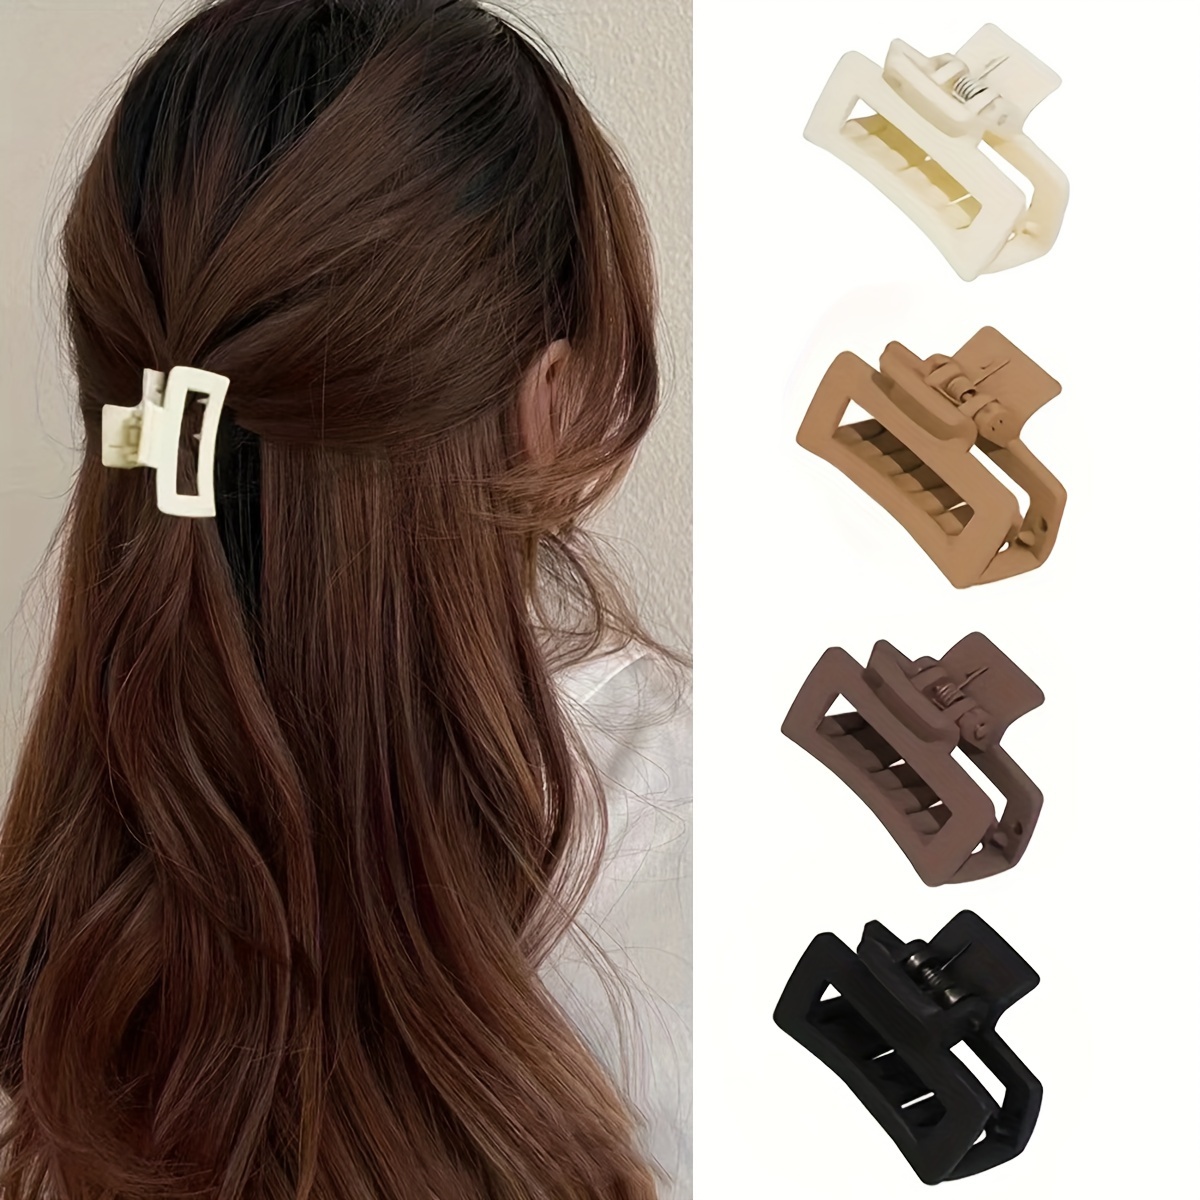 

4 Pcs Matte Rectangle Hair Claw Clips, Solid Color Non-slip Strong Hold Jaw Hair Clips, Styling Accessories For Women Thin Thick Hair